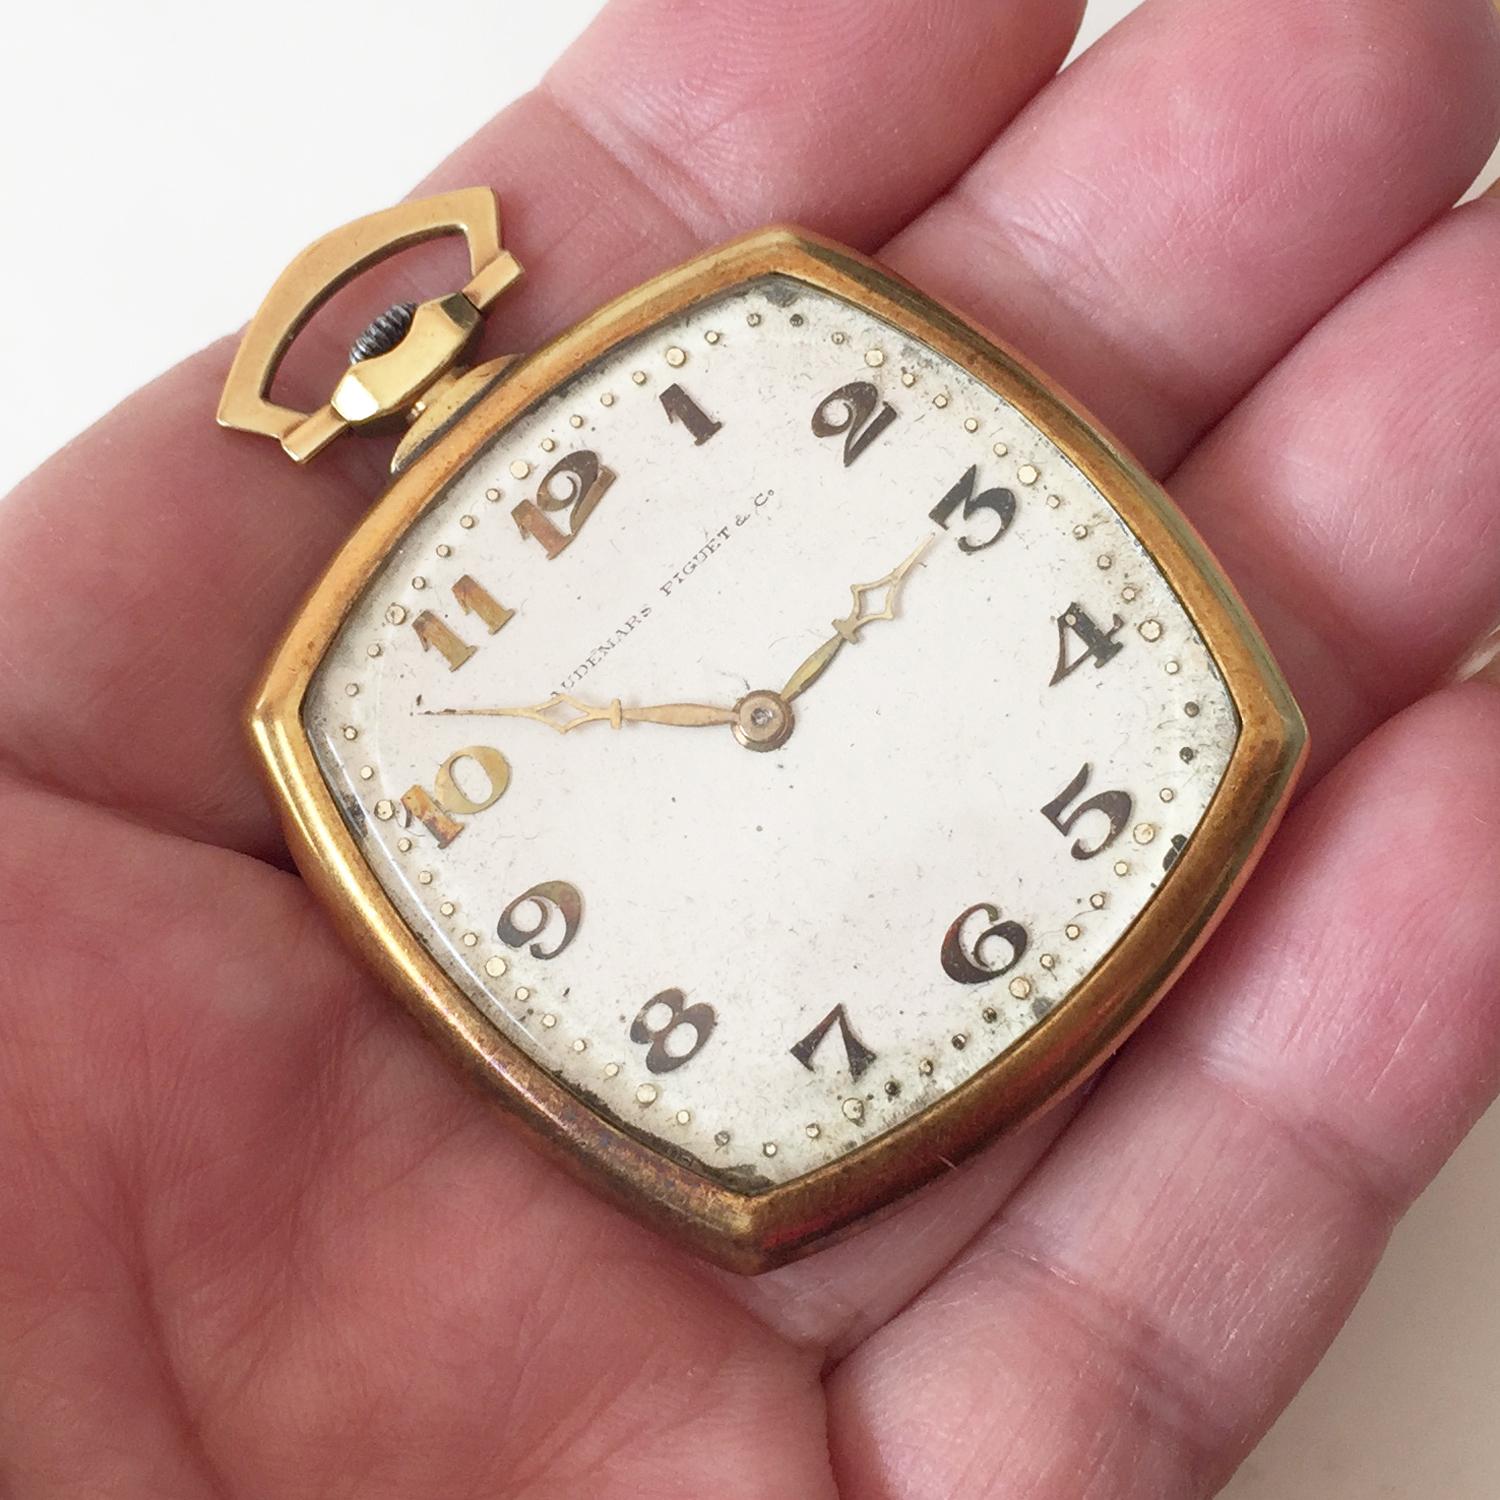 Vintage 18kt gold cushion shape square open face AUDEMARS PIGUET & Co. pocket watch. Weight 48.72 grams. Hallmarked 18k. Case measured 40 mm x 40 mm x 7.2 mm. Back side of watch has etched 3 letters - GNP. Crystal in very good condition, no deep